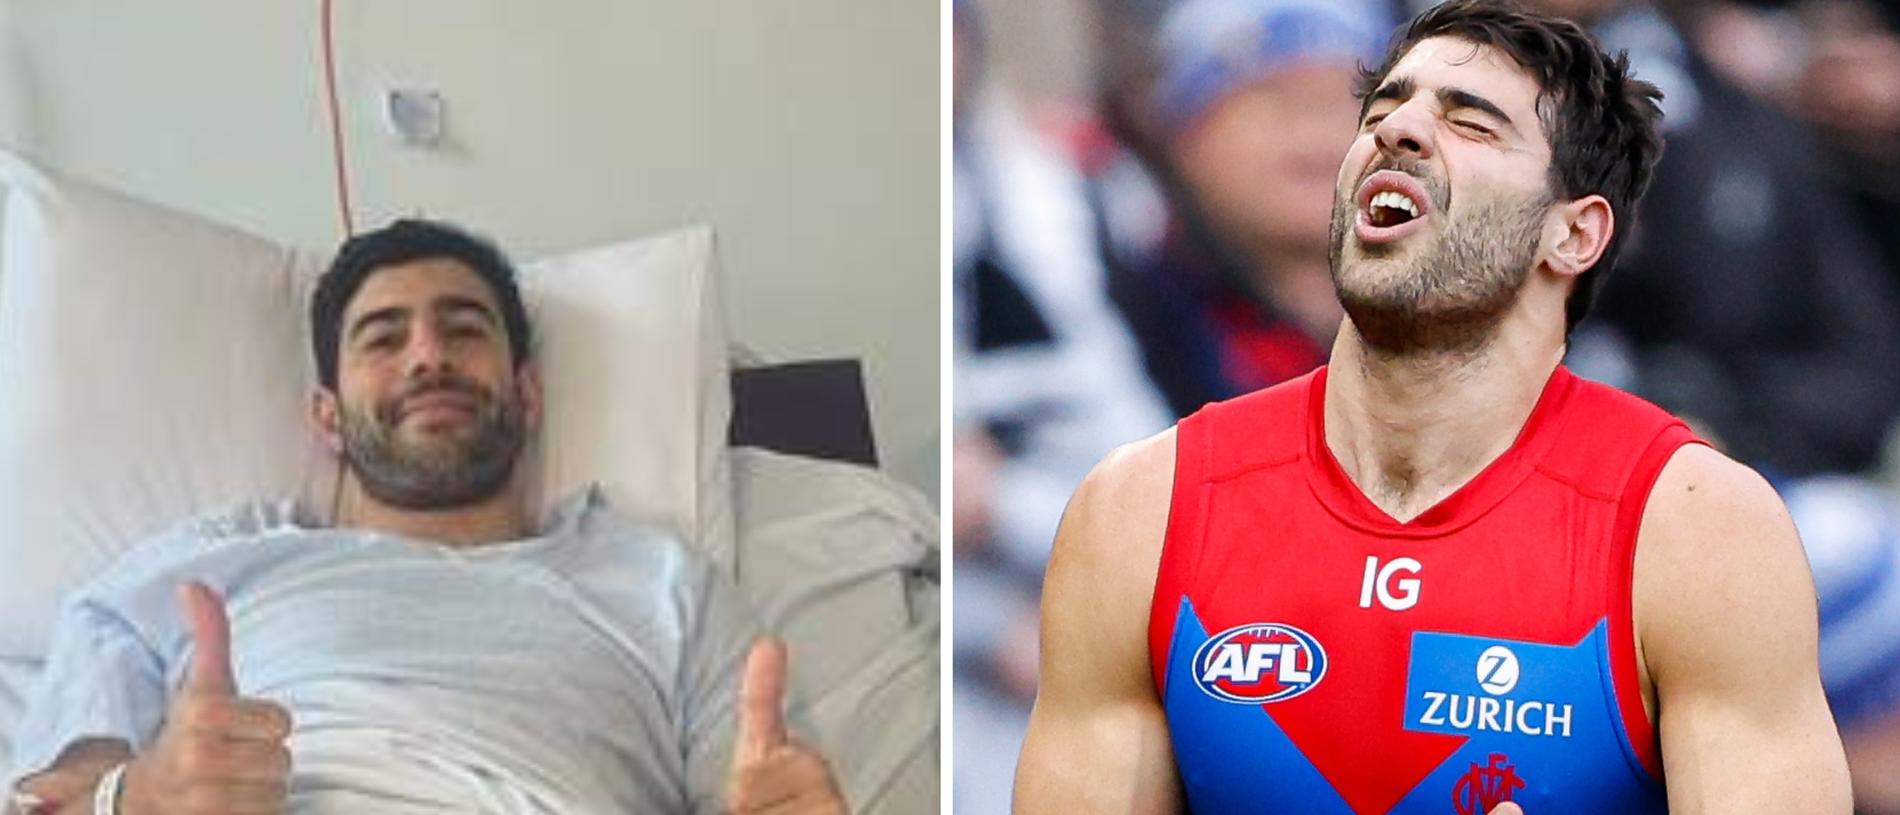 Demons superstar Christian Petracca has opened up on his “traumatic” recovery from a season-ending internal injury likened to a “car accident” victim including having gruesome open surgery.